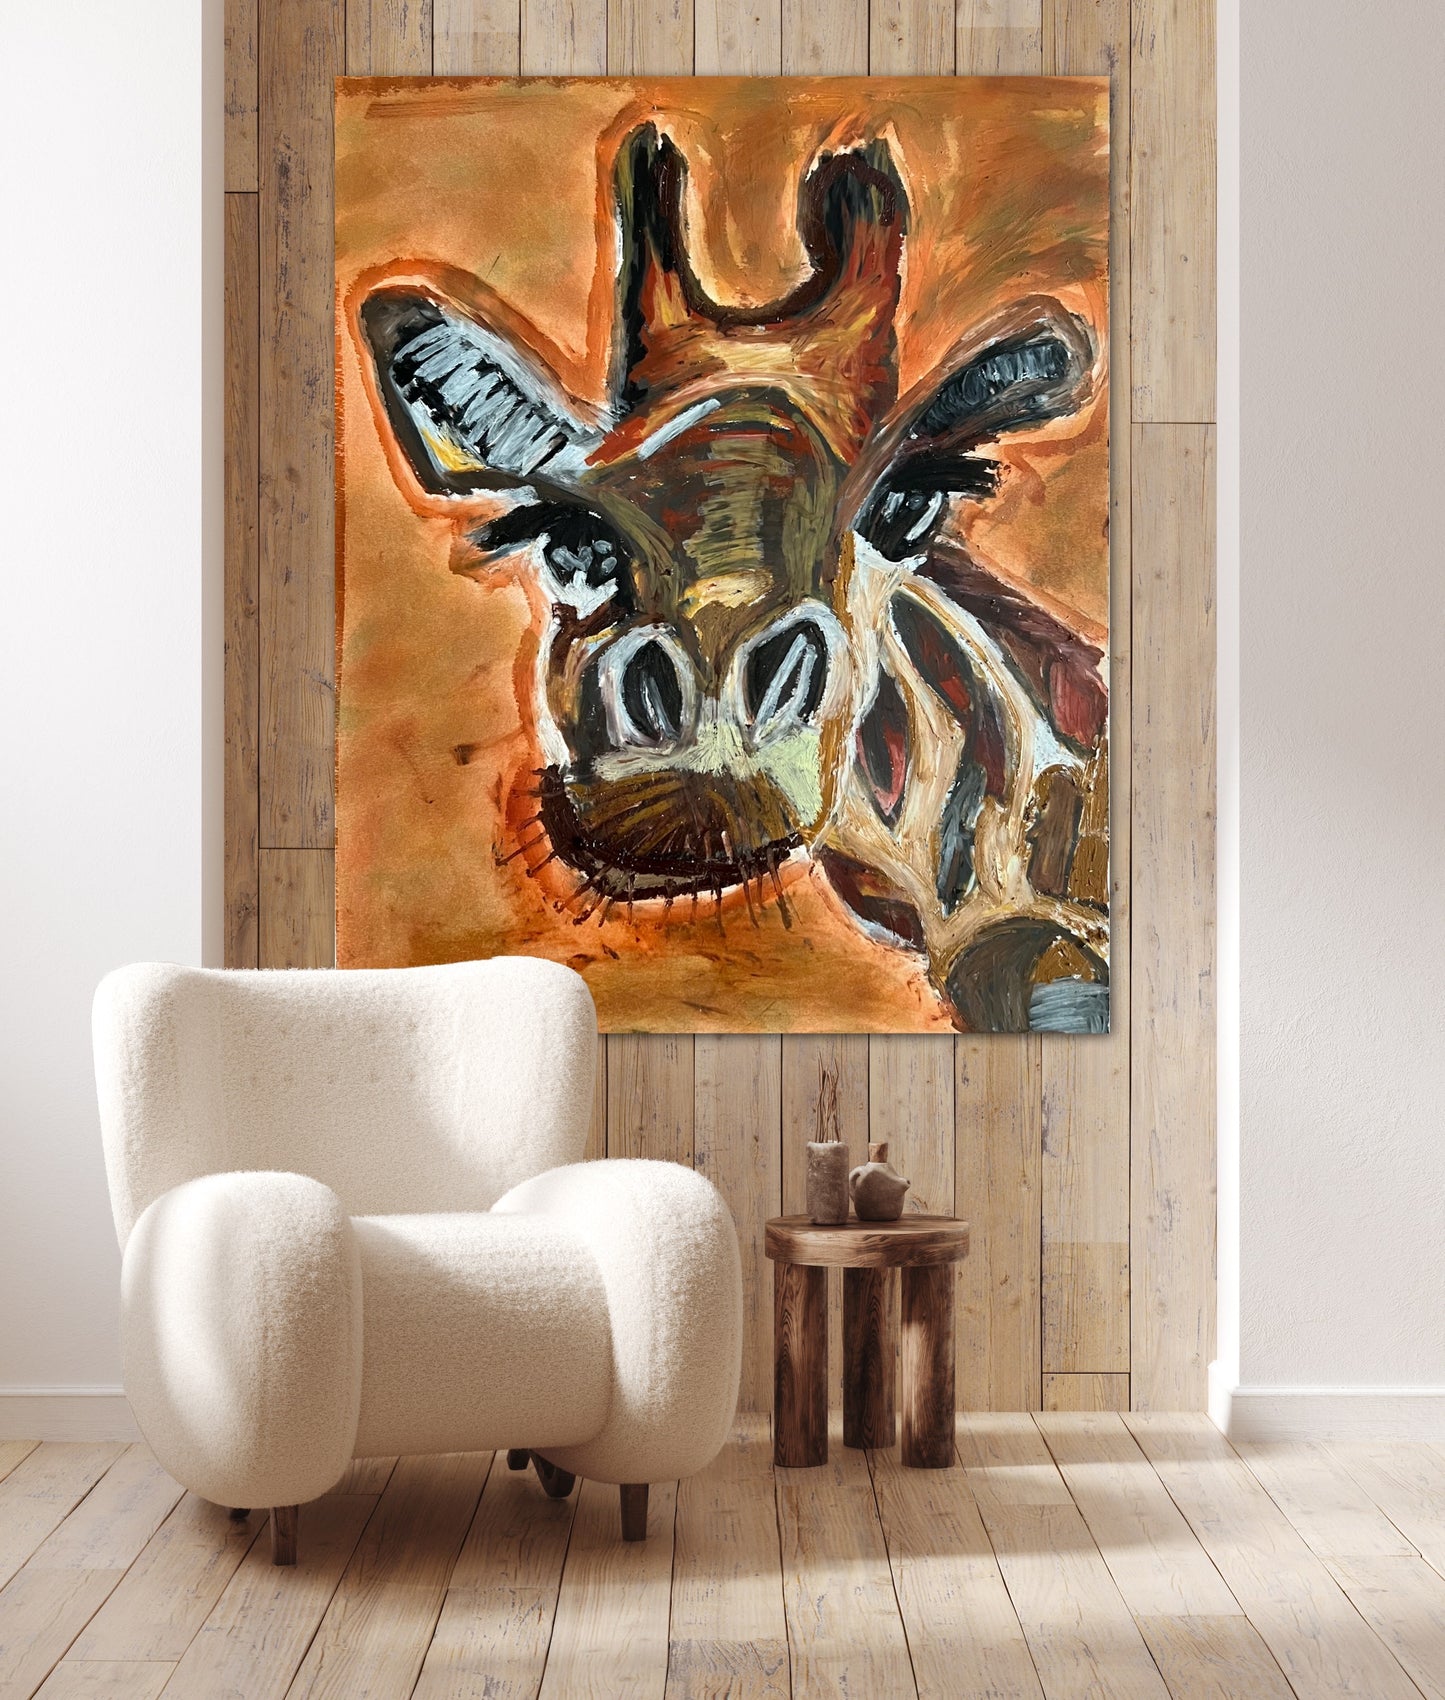 Brown Giraffe - Print, Poster or Stretched Canvas Print in more sizes